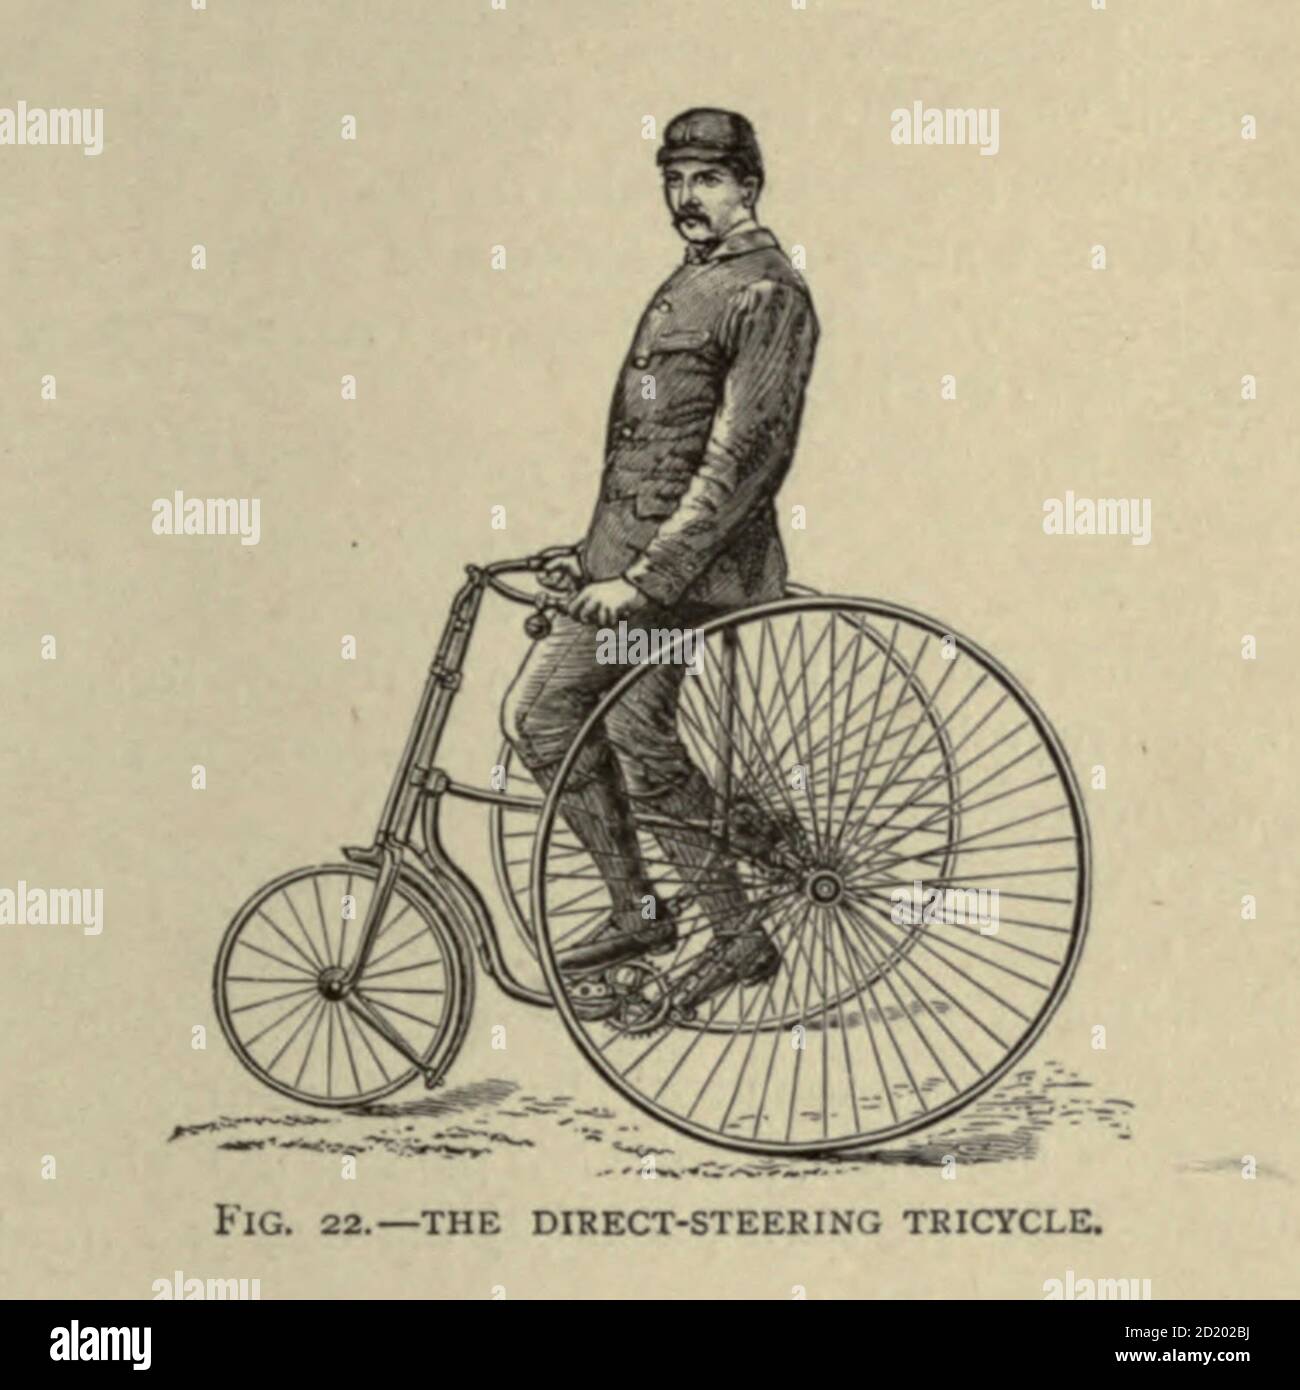 Direct steering tricycle Cycling by The right Hon. Earl of Albemarle, William Coutts Keppel, (1832-1894) and George Lacy Hillier (1856-1941); Joseph Pennell (1857-1926) Published by London and Bombay : Longmans, Green and co. in 1896. The Badminton Library Stock Photo